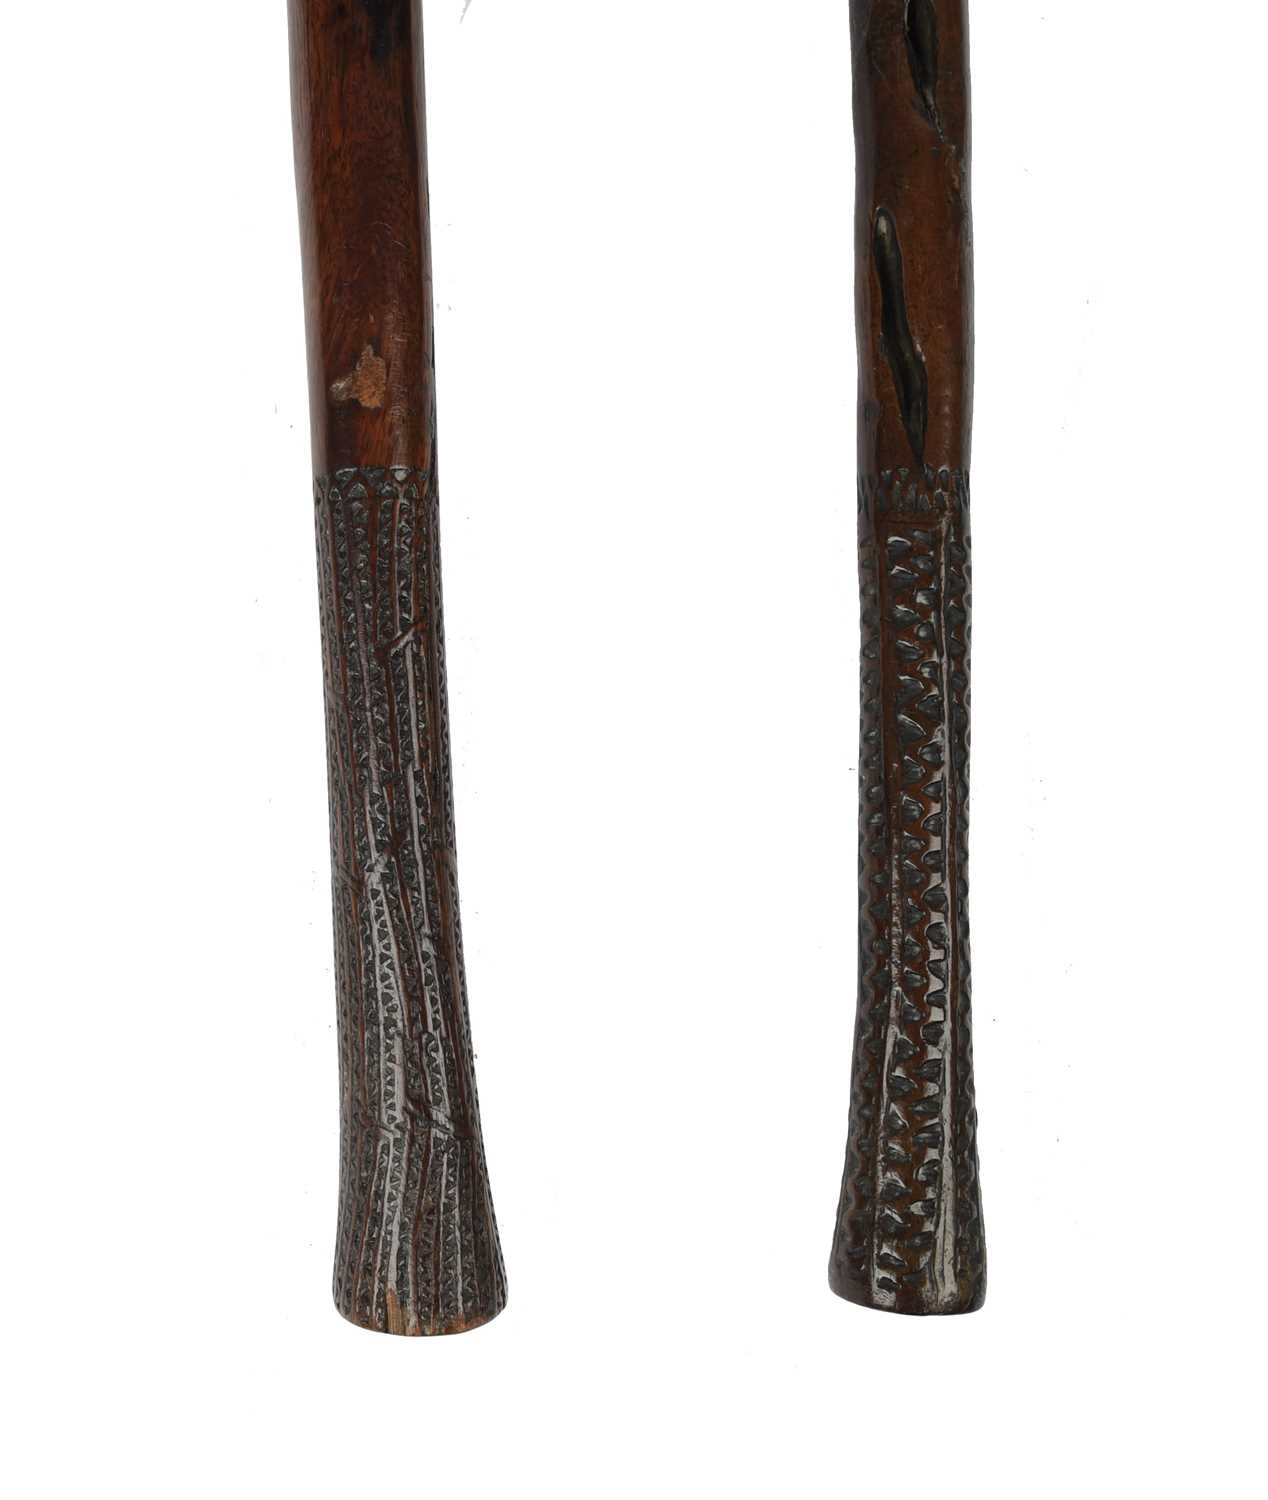 A Fijian throwing club (ula), multi-lobed head with dome finial, the slightly waisted haft with - Image 2 of 5